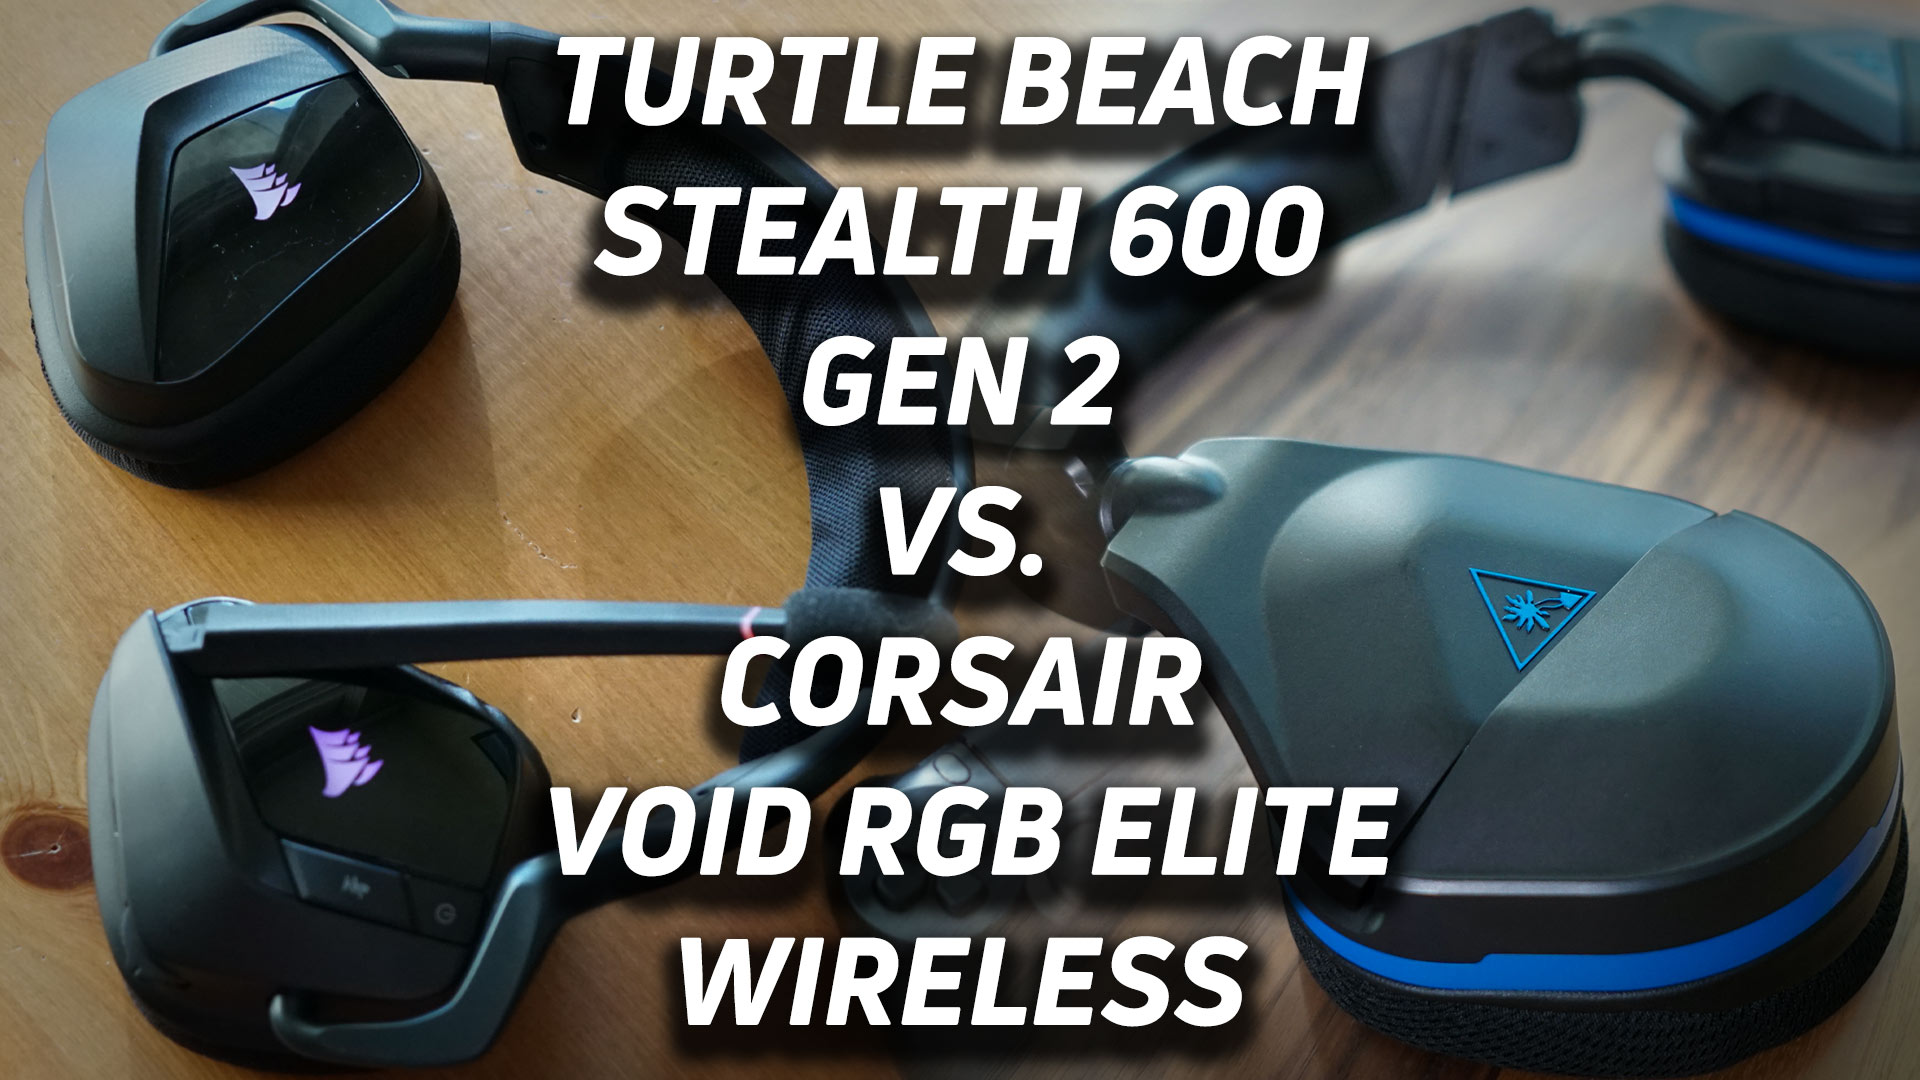 Turtle Beach Expands Its Mobile Gaming Accessories Line With the